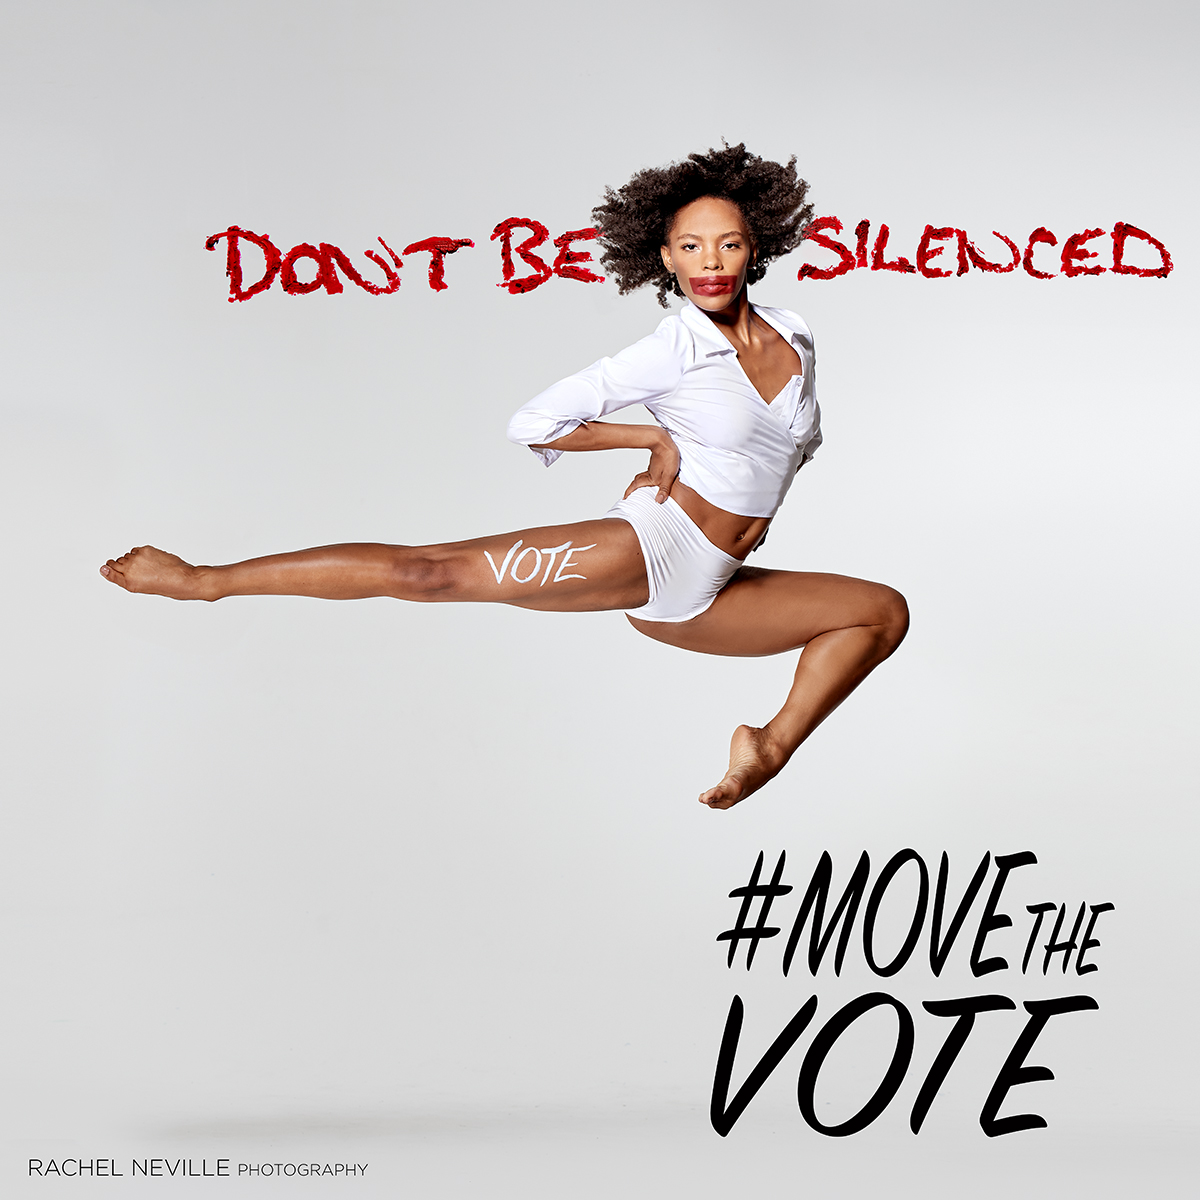 Samantha Figgins, Alvin Ailey, dancer in white, don't be silenced, move the vote message in a jump